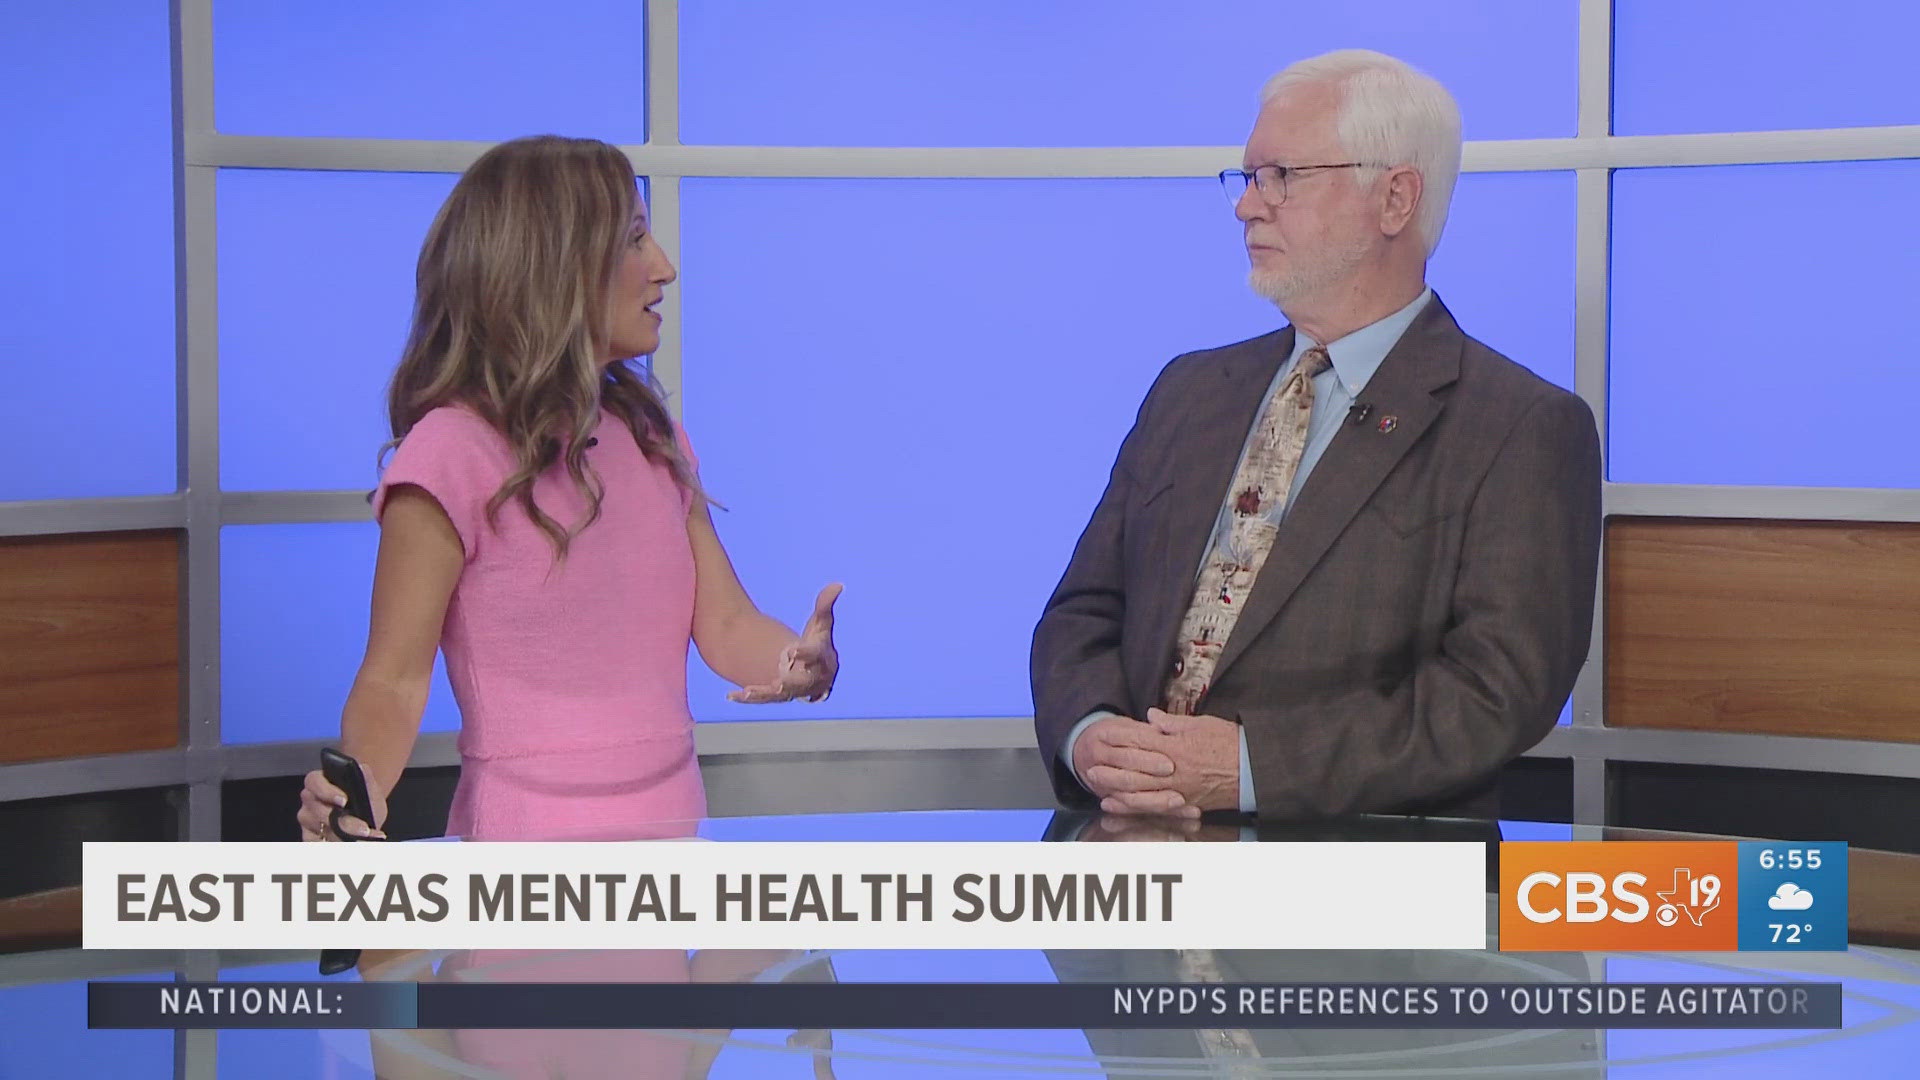 Andrews Center to present East Texas Mental Health Summit to raise awareness of needs facing region